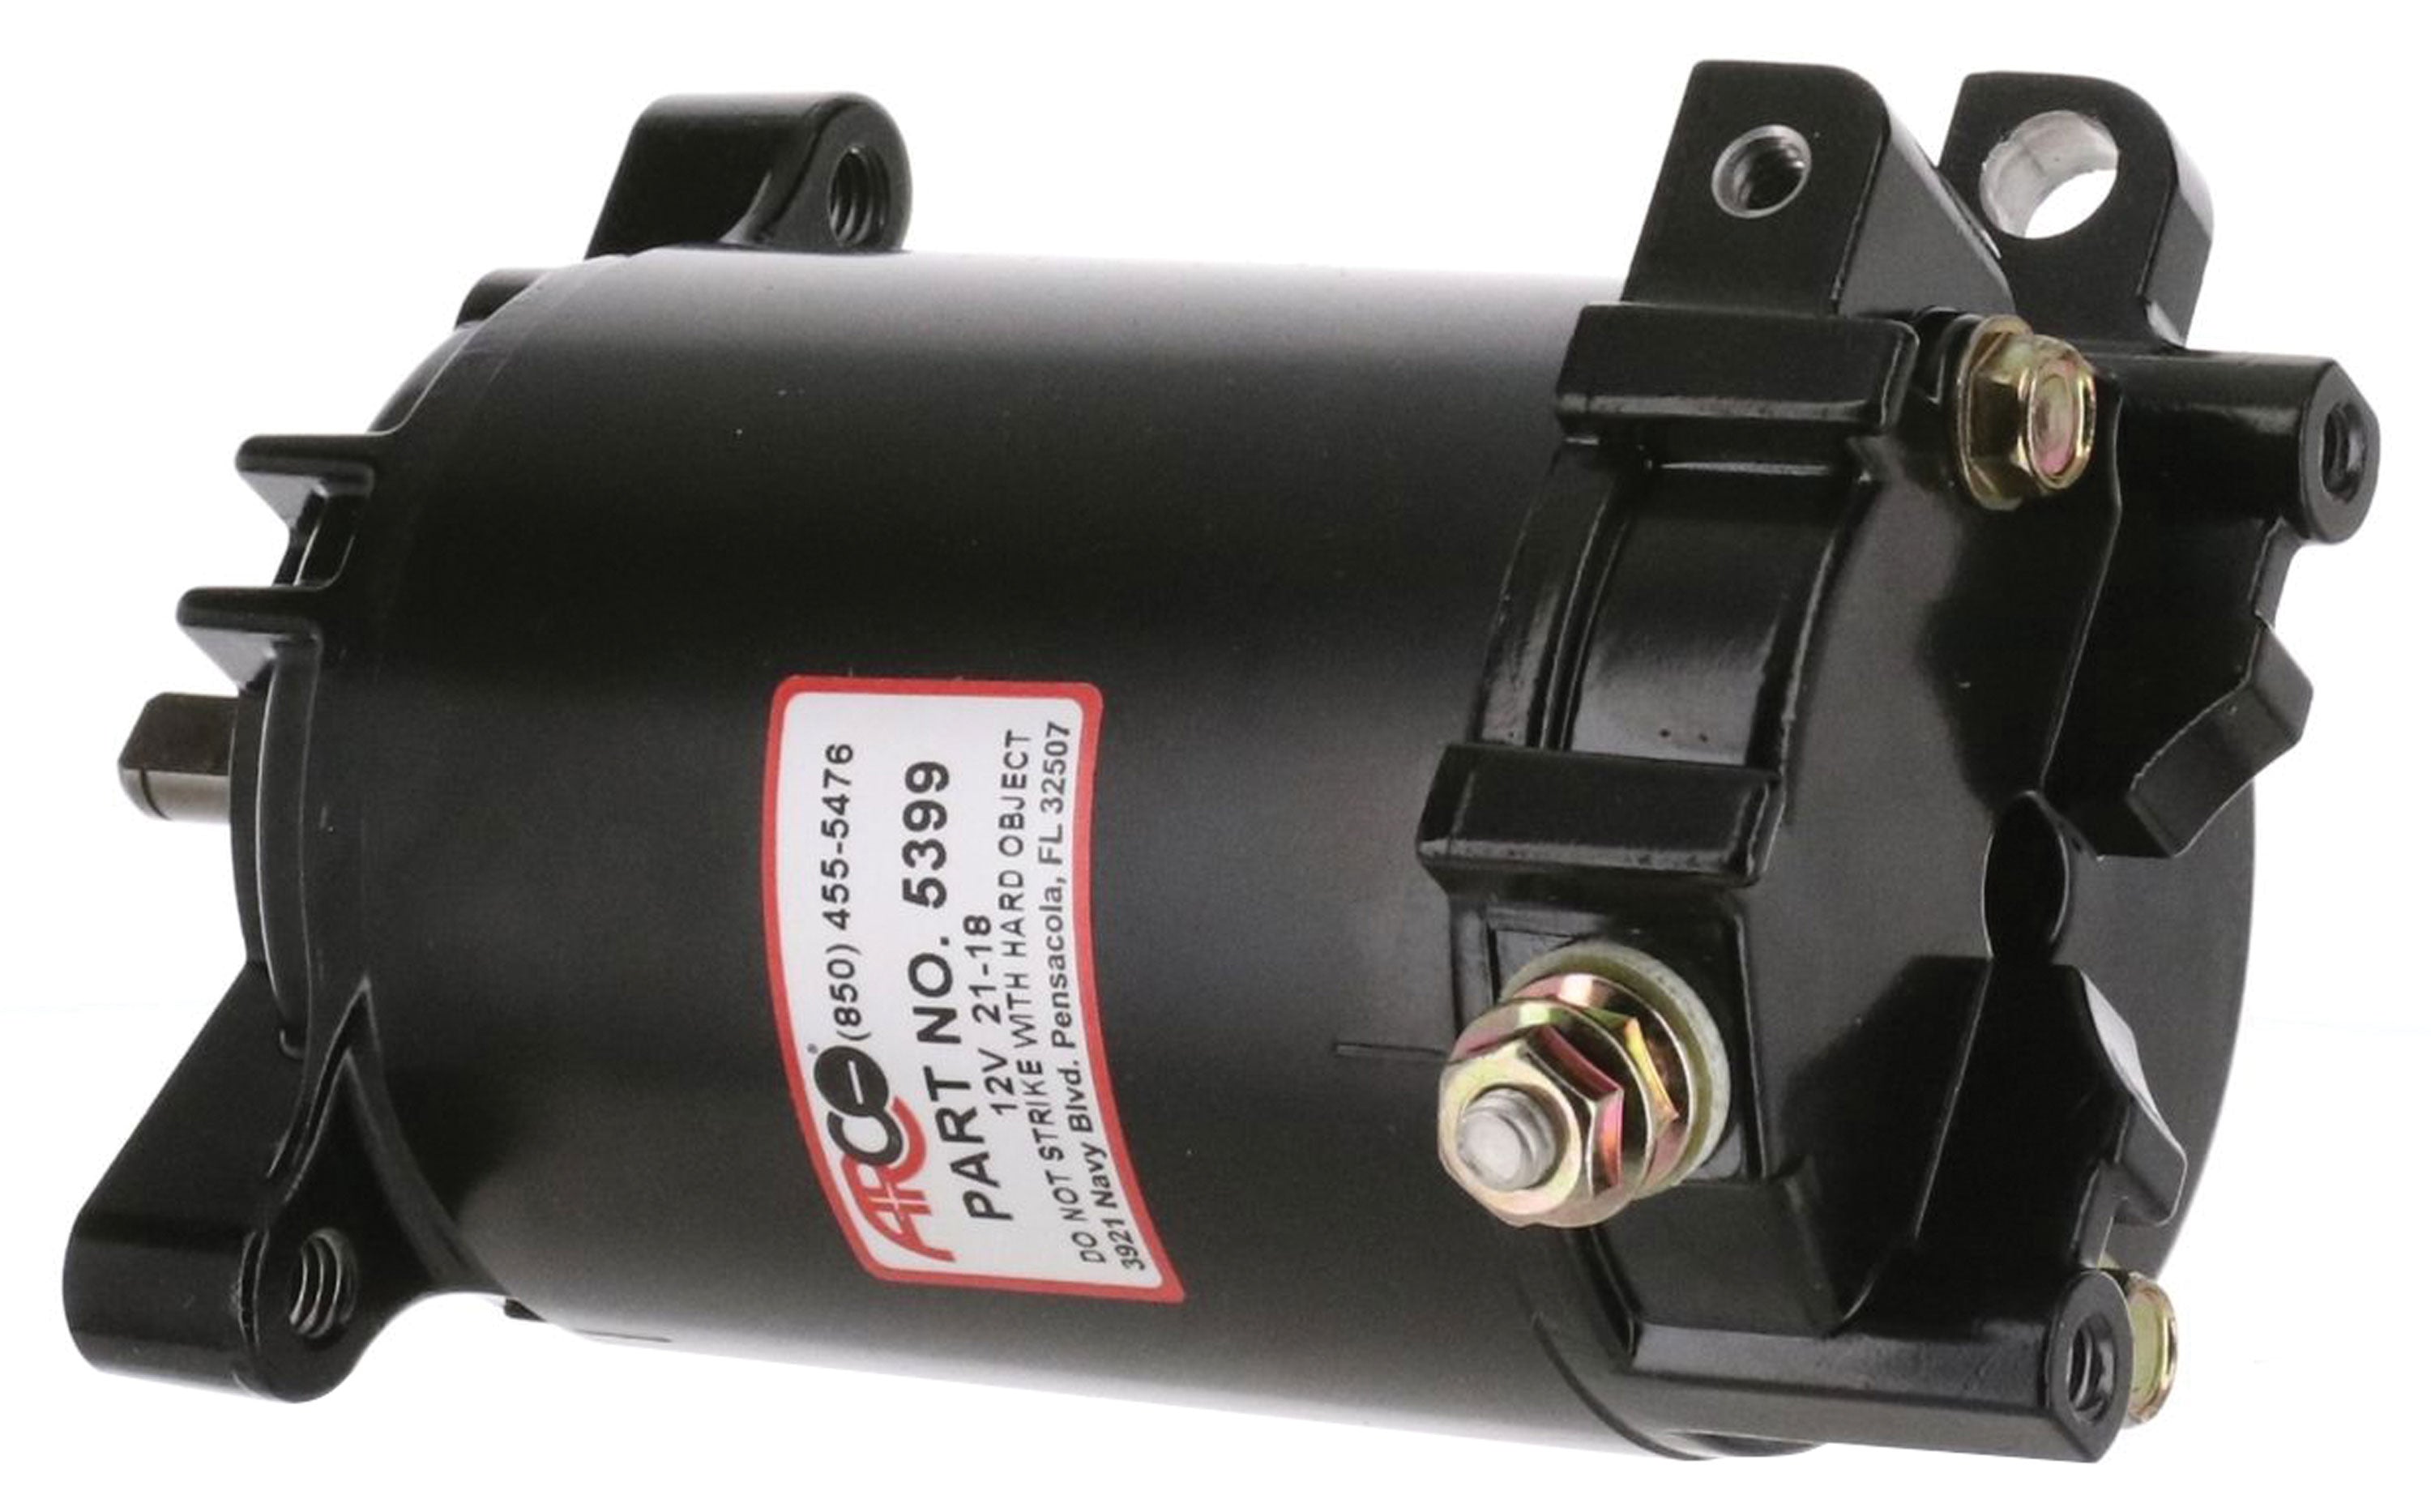 ARCO 5399 Outboard Starter for BRP-OMC 90-155 HP (1997+), 60Â° V4 (1998-2000) 80 HP, (1998-2000) 100 HP